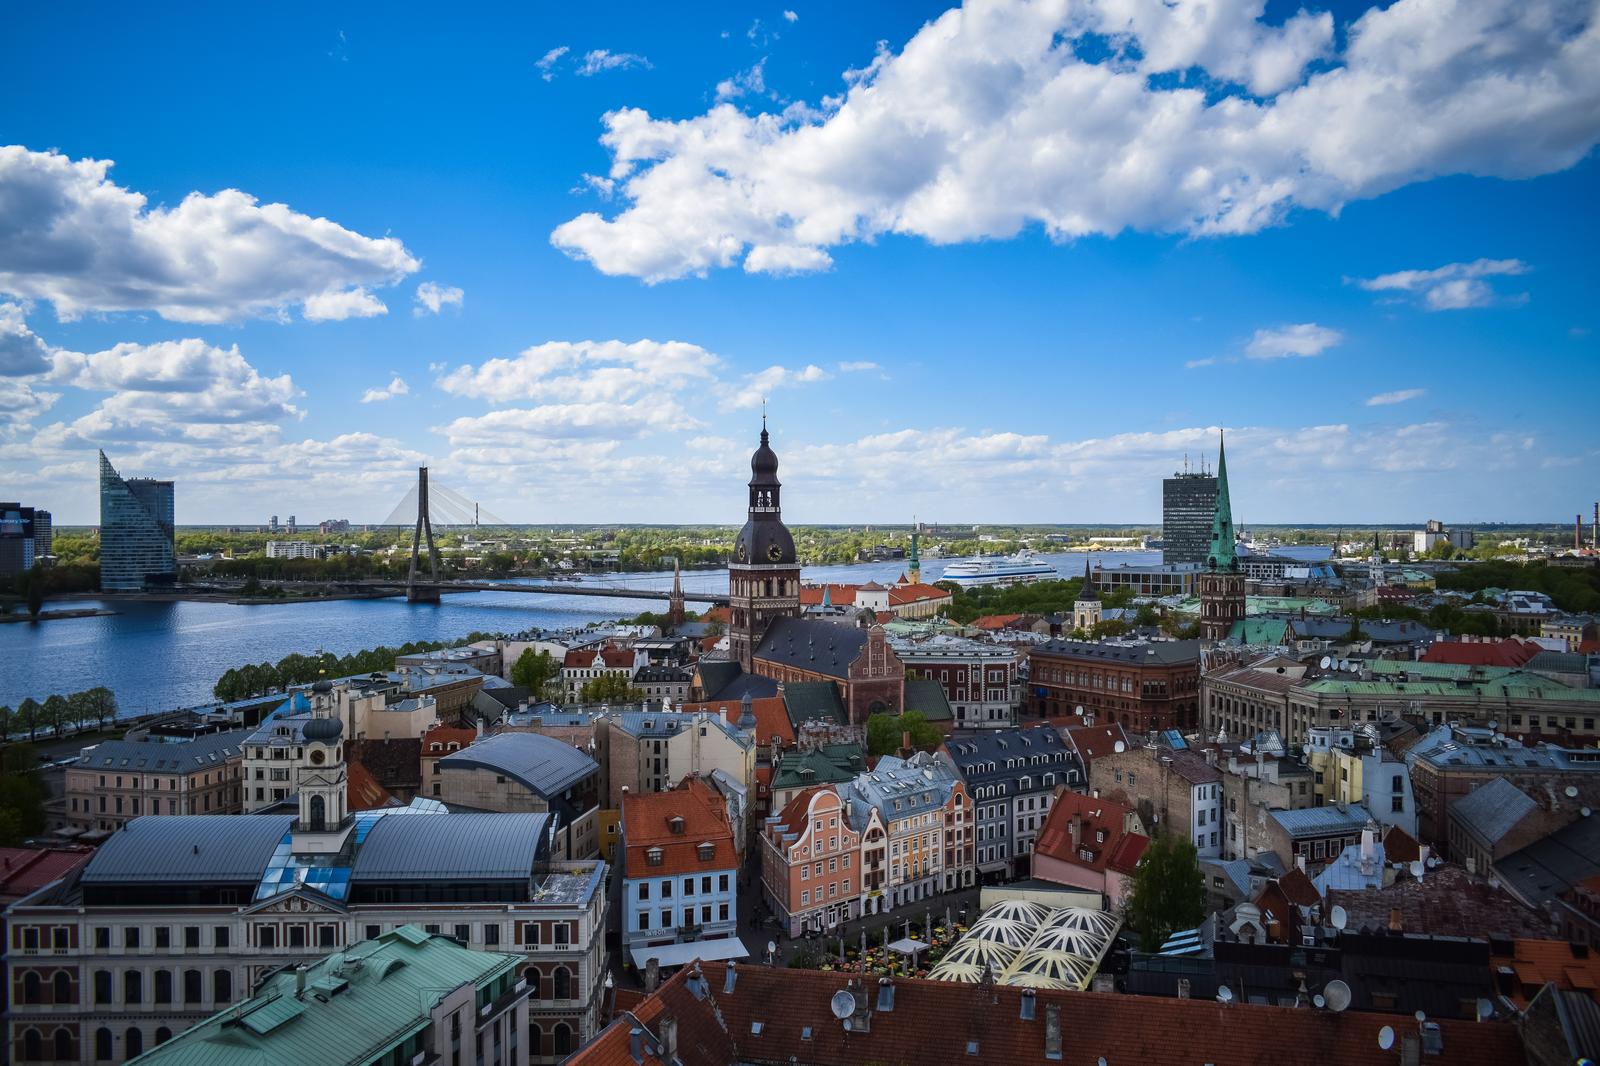 If You Can Score More Than 18 on This Famous Landmarks Quiz, You Probably Know All About the World Latvia